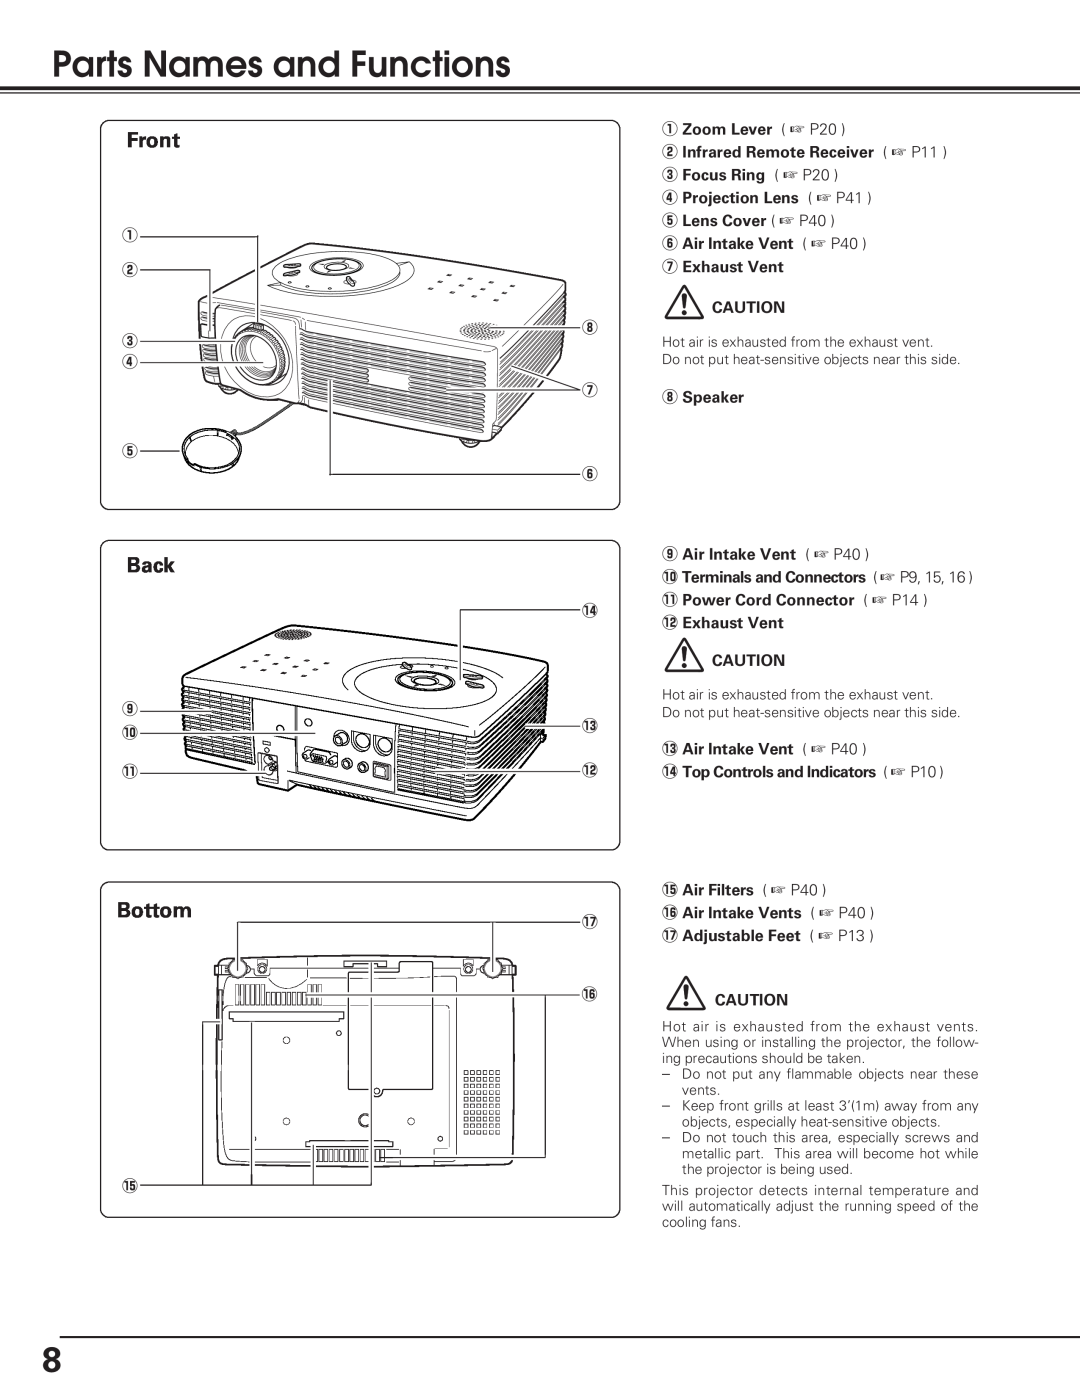 Eiki LC-SD12 owner manual Parts Names and Functions, Front, Back, Bottom 